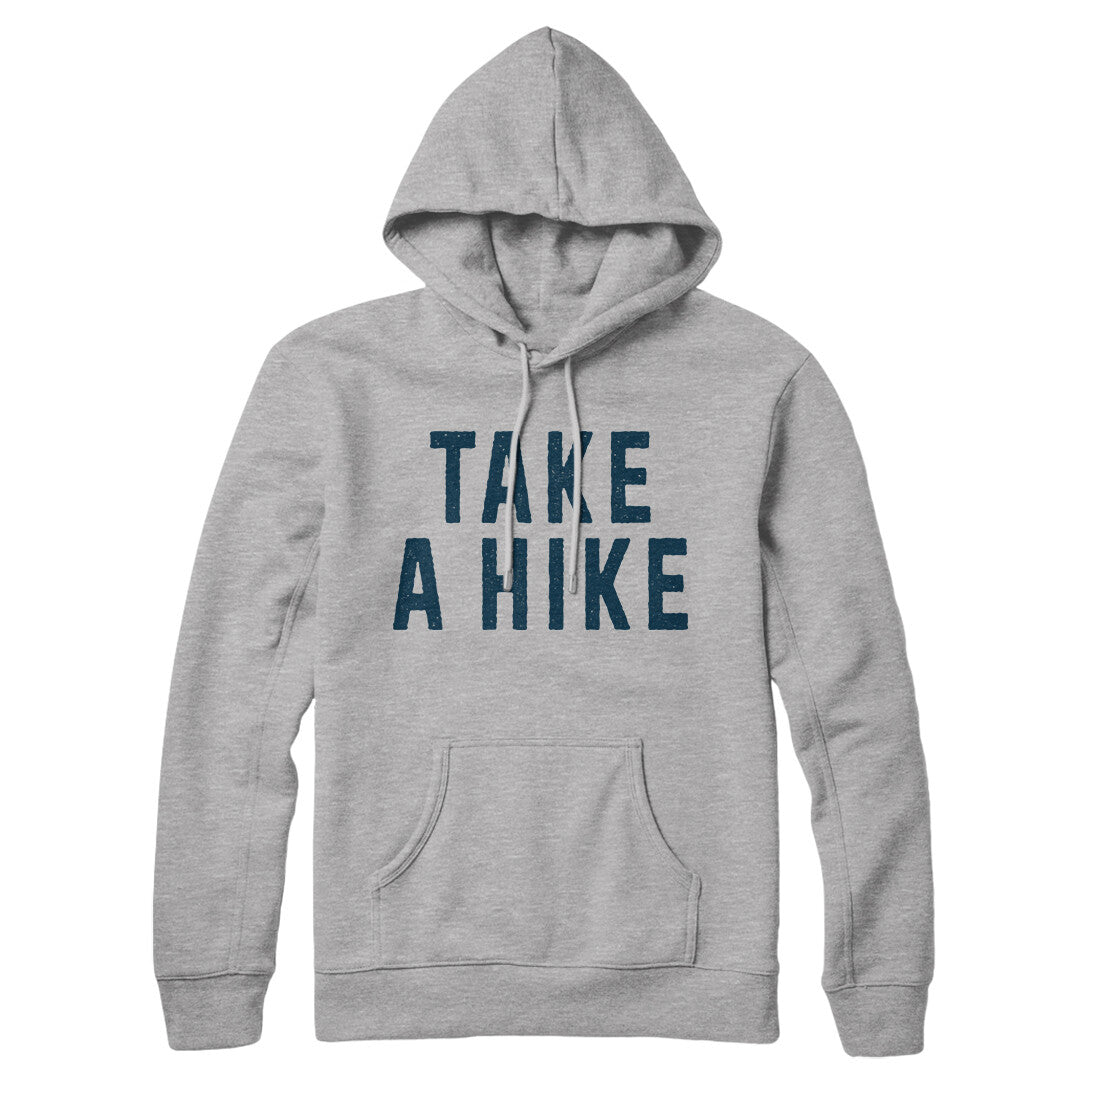 Take a Hike in Heather Grey Color